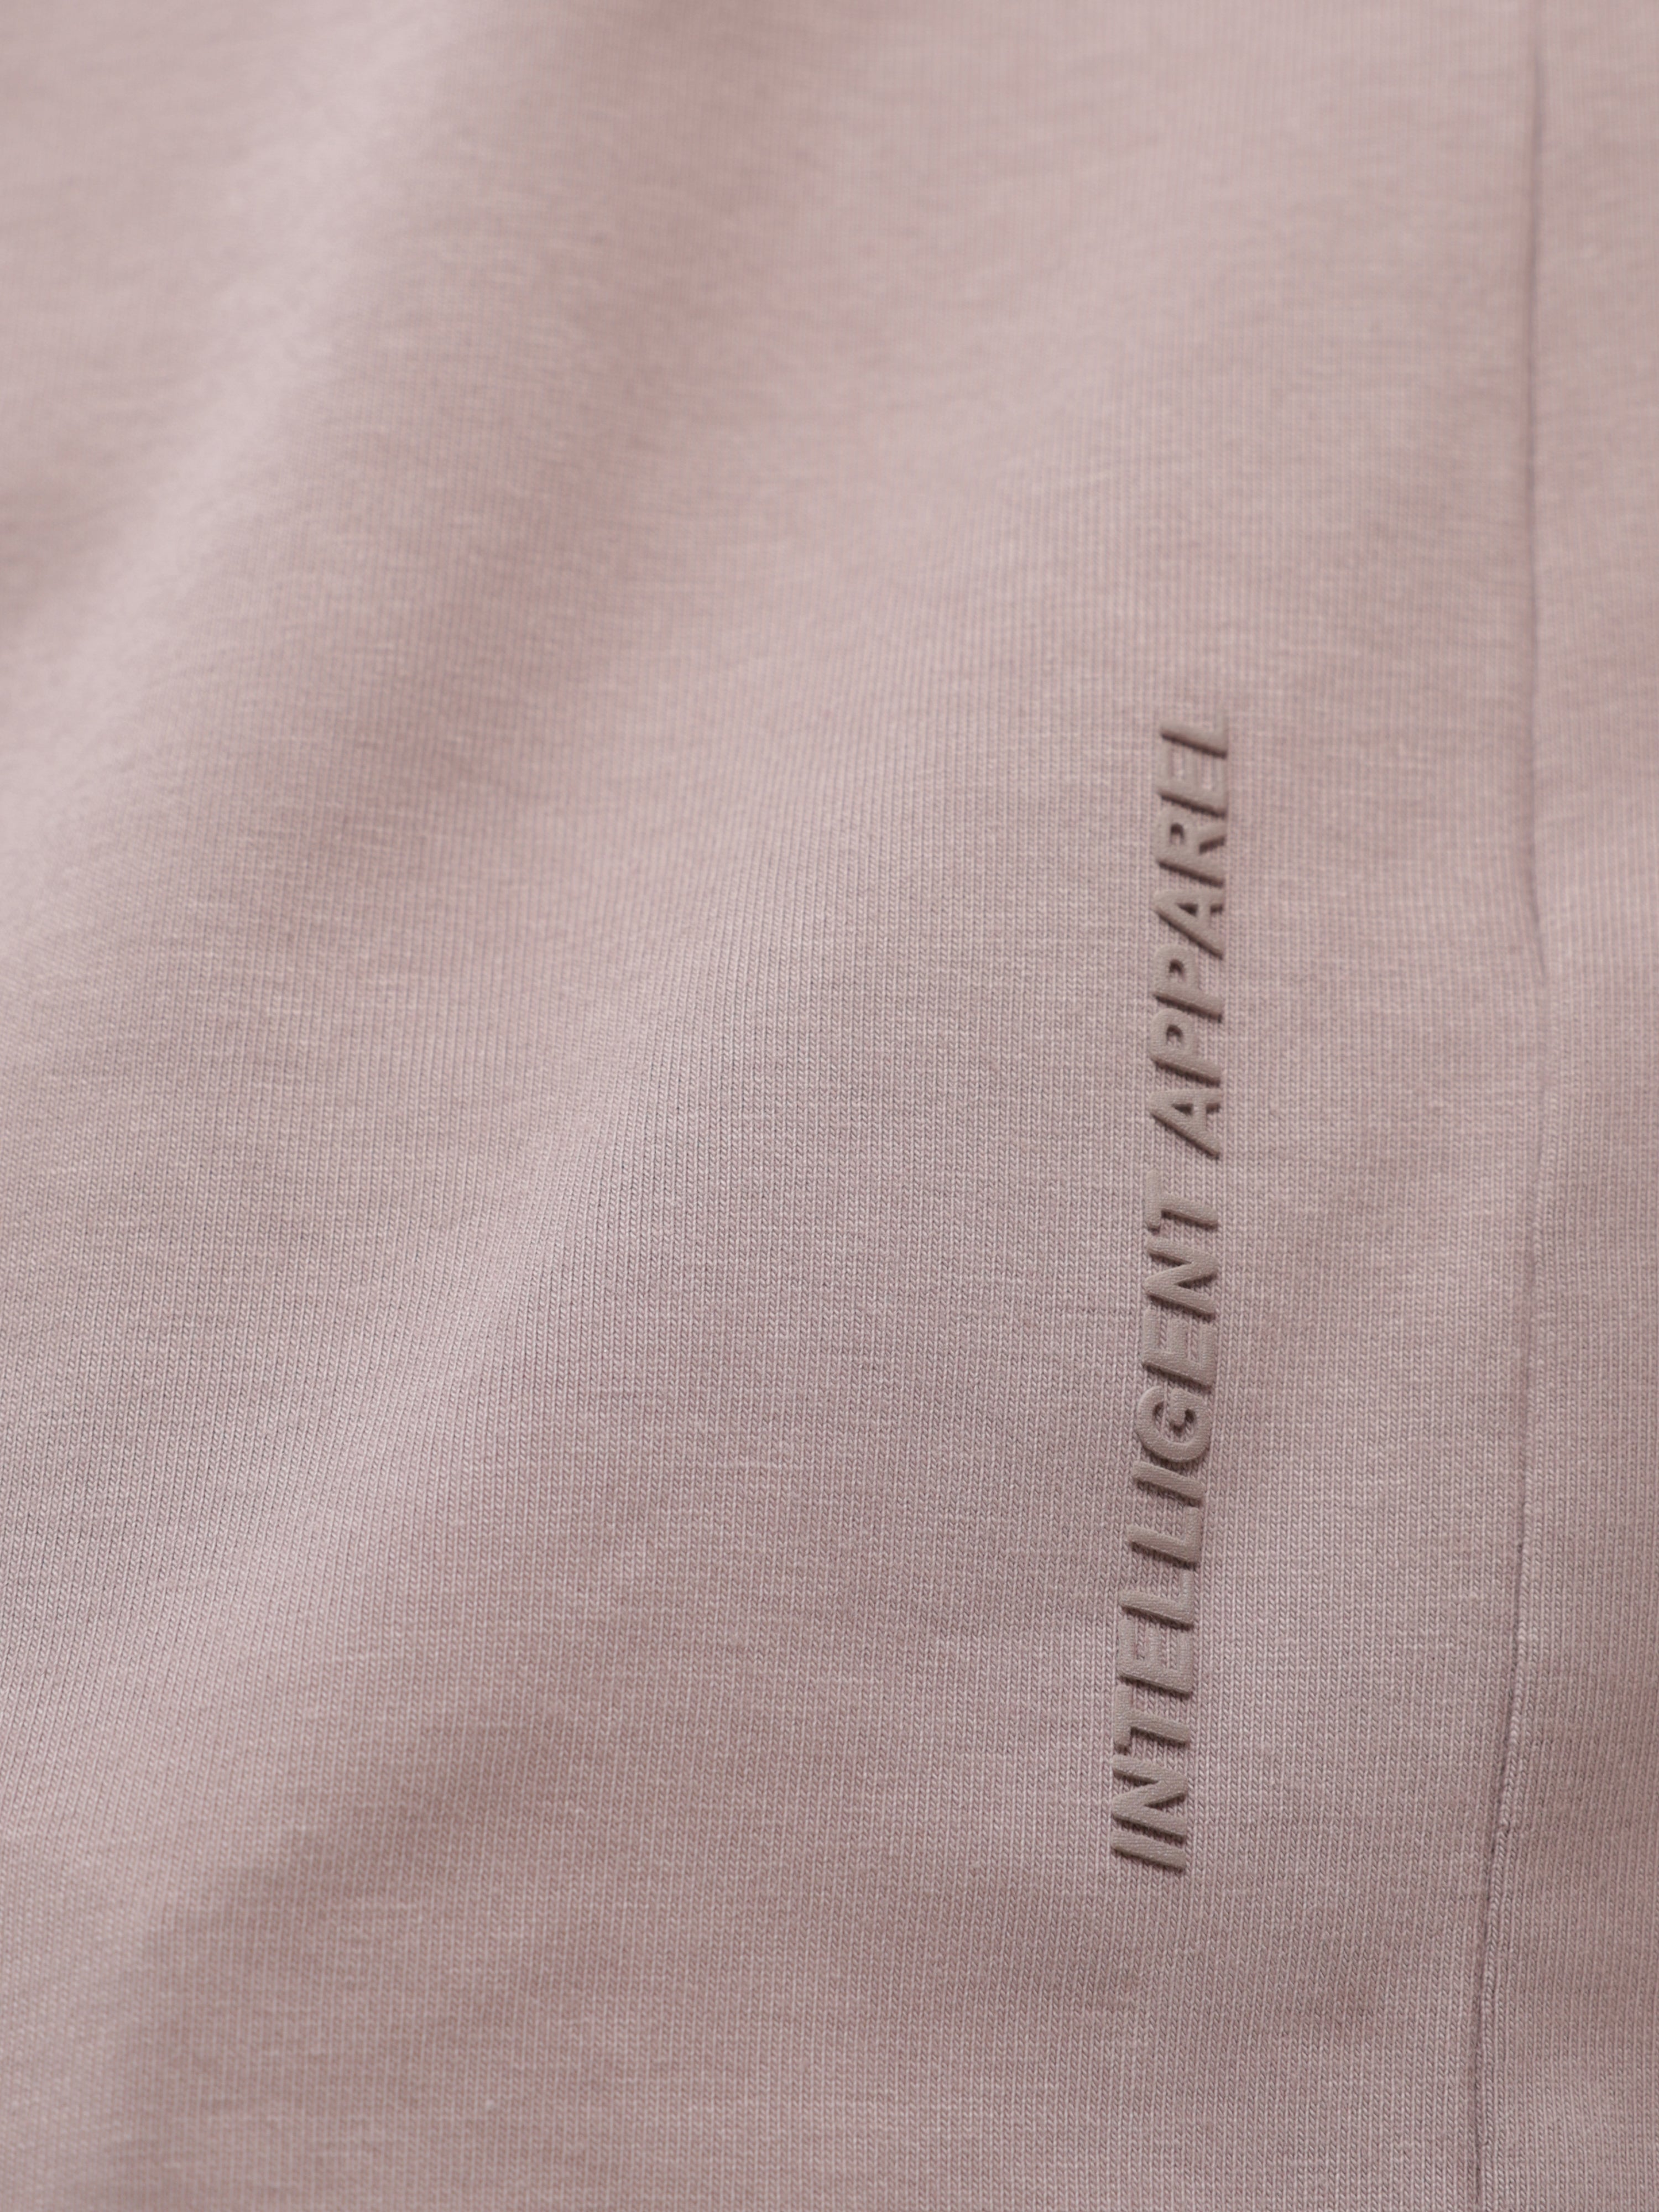 Close-up of Dusky Maroon stain-proof and odor-resistant round-neck Turms T-shirt with "INTELLIGENT APPAREL" text.